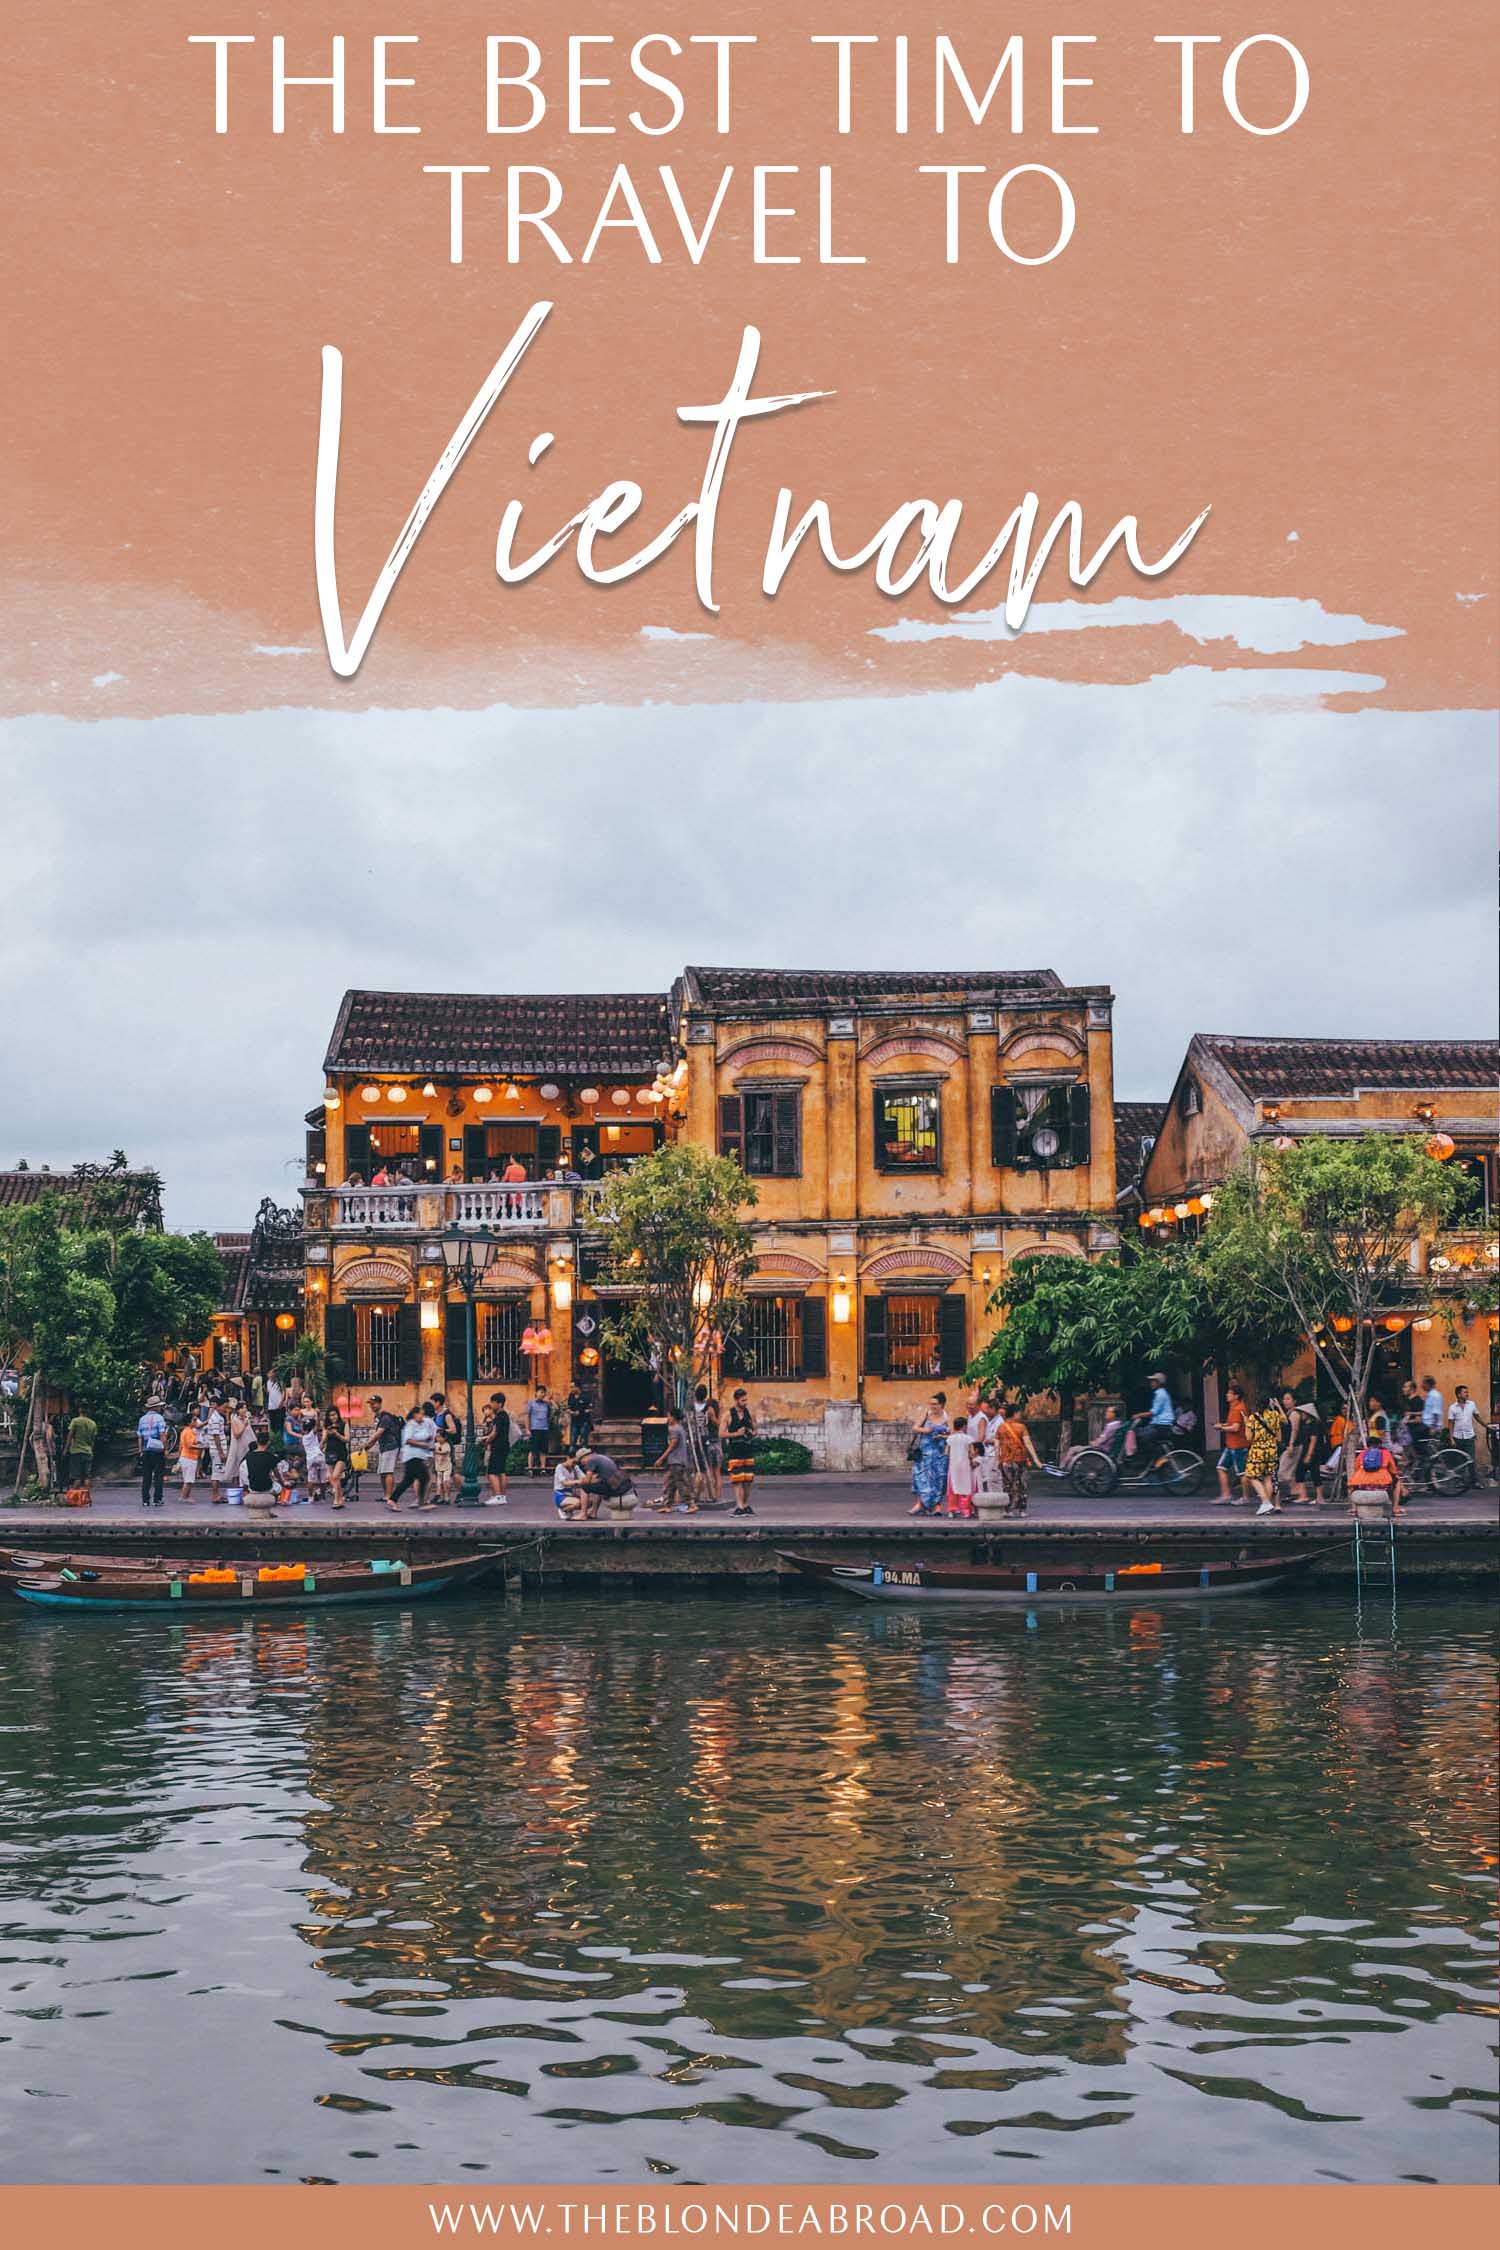 the Best time to travel to Vietnam